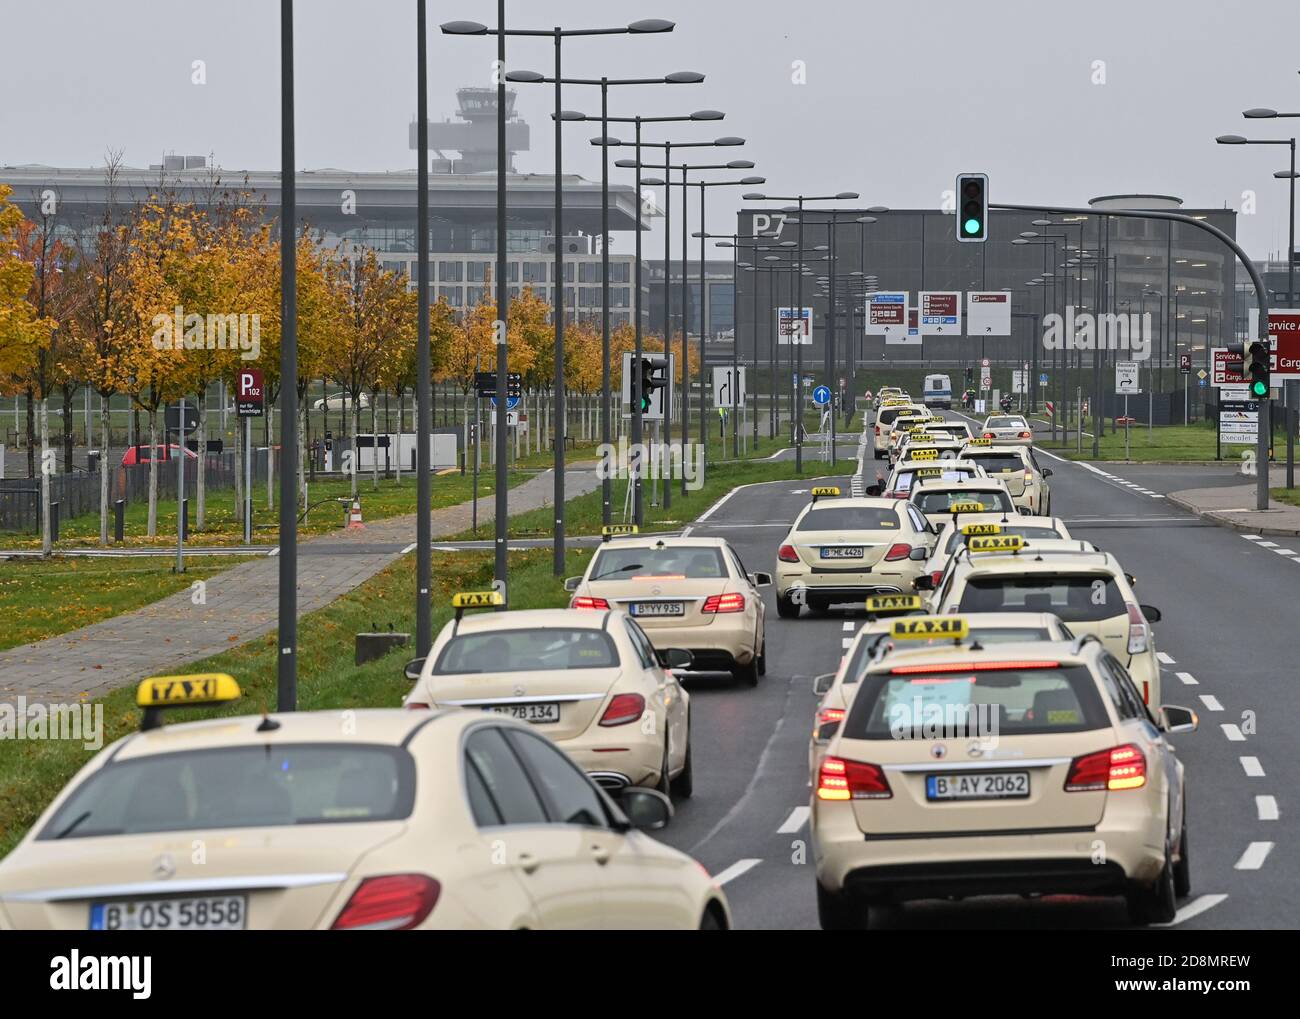 31 October 2020, Brandenburg, Schönefeld: Berlin taxi drivers are on a parade in the direction of the capital airport Berlin Brandenburg "Willy Brandt" (BER). The airport was opened on 31.10.2020 after a long delay. The Berlin taxi drivers started with their parade in Tegel. At this rally, they are demanding that all 7000 Berlin taxis be given loading rights at BER in future, not just 300 as previously planned. Photo: Patrick Pleul/dpa-Zentralbild/ZB Stock Photo